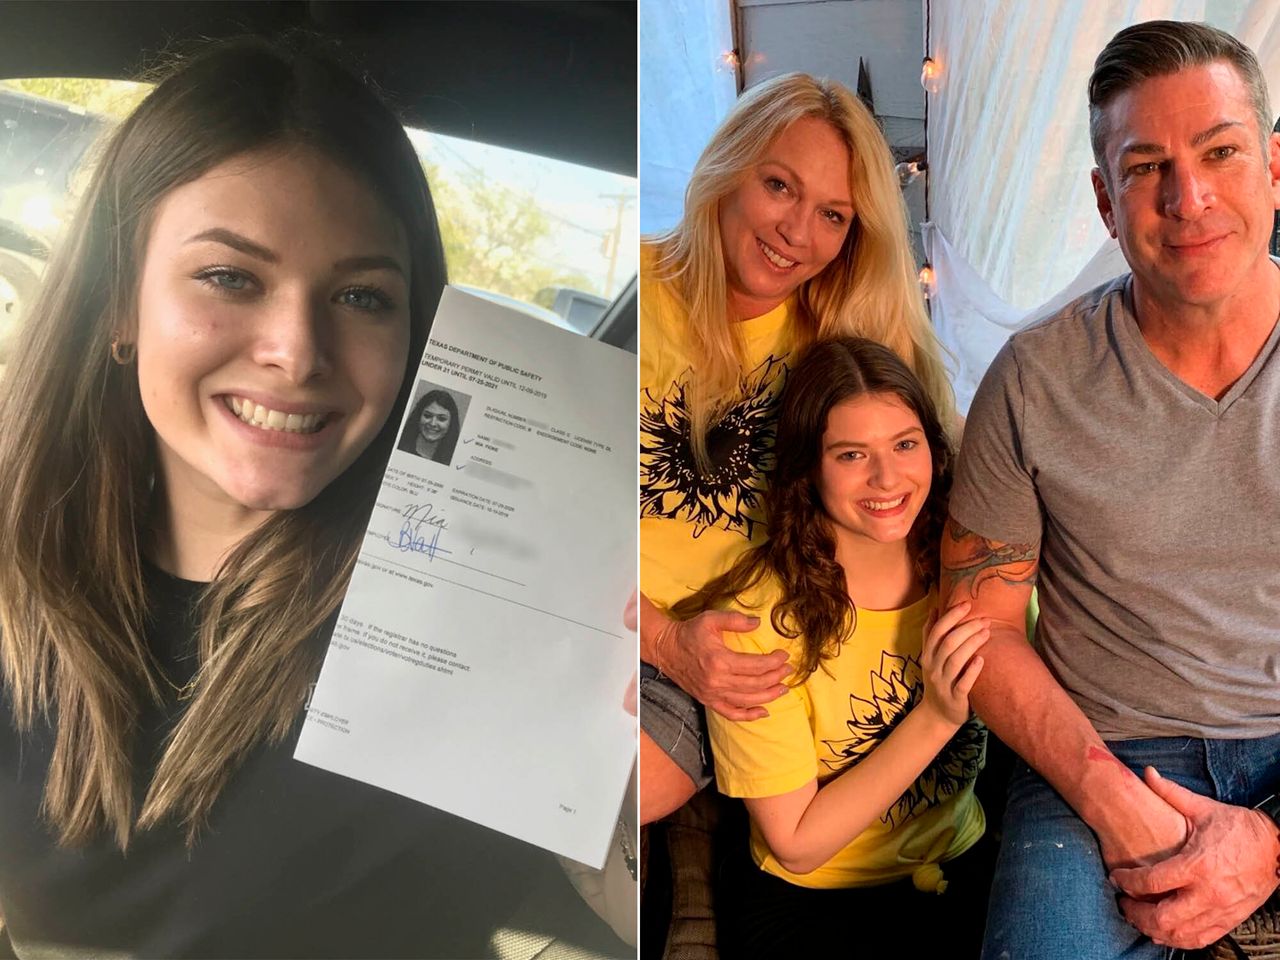 Mia after being issued a temporary driver's license in October (left), and Mia with her parents on Sept. 30, the day she was released on probation.